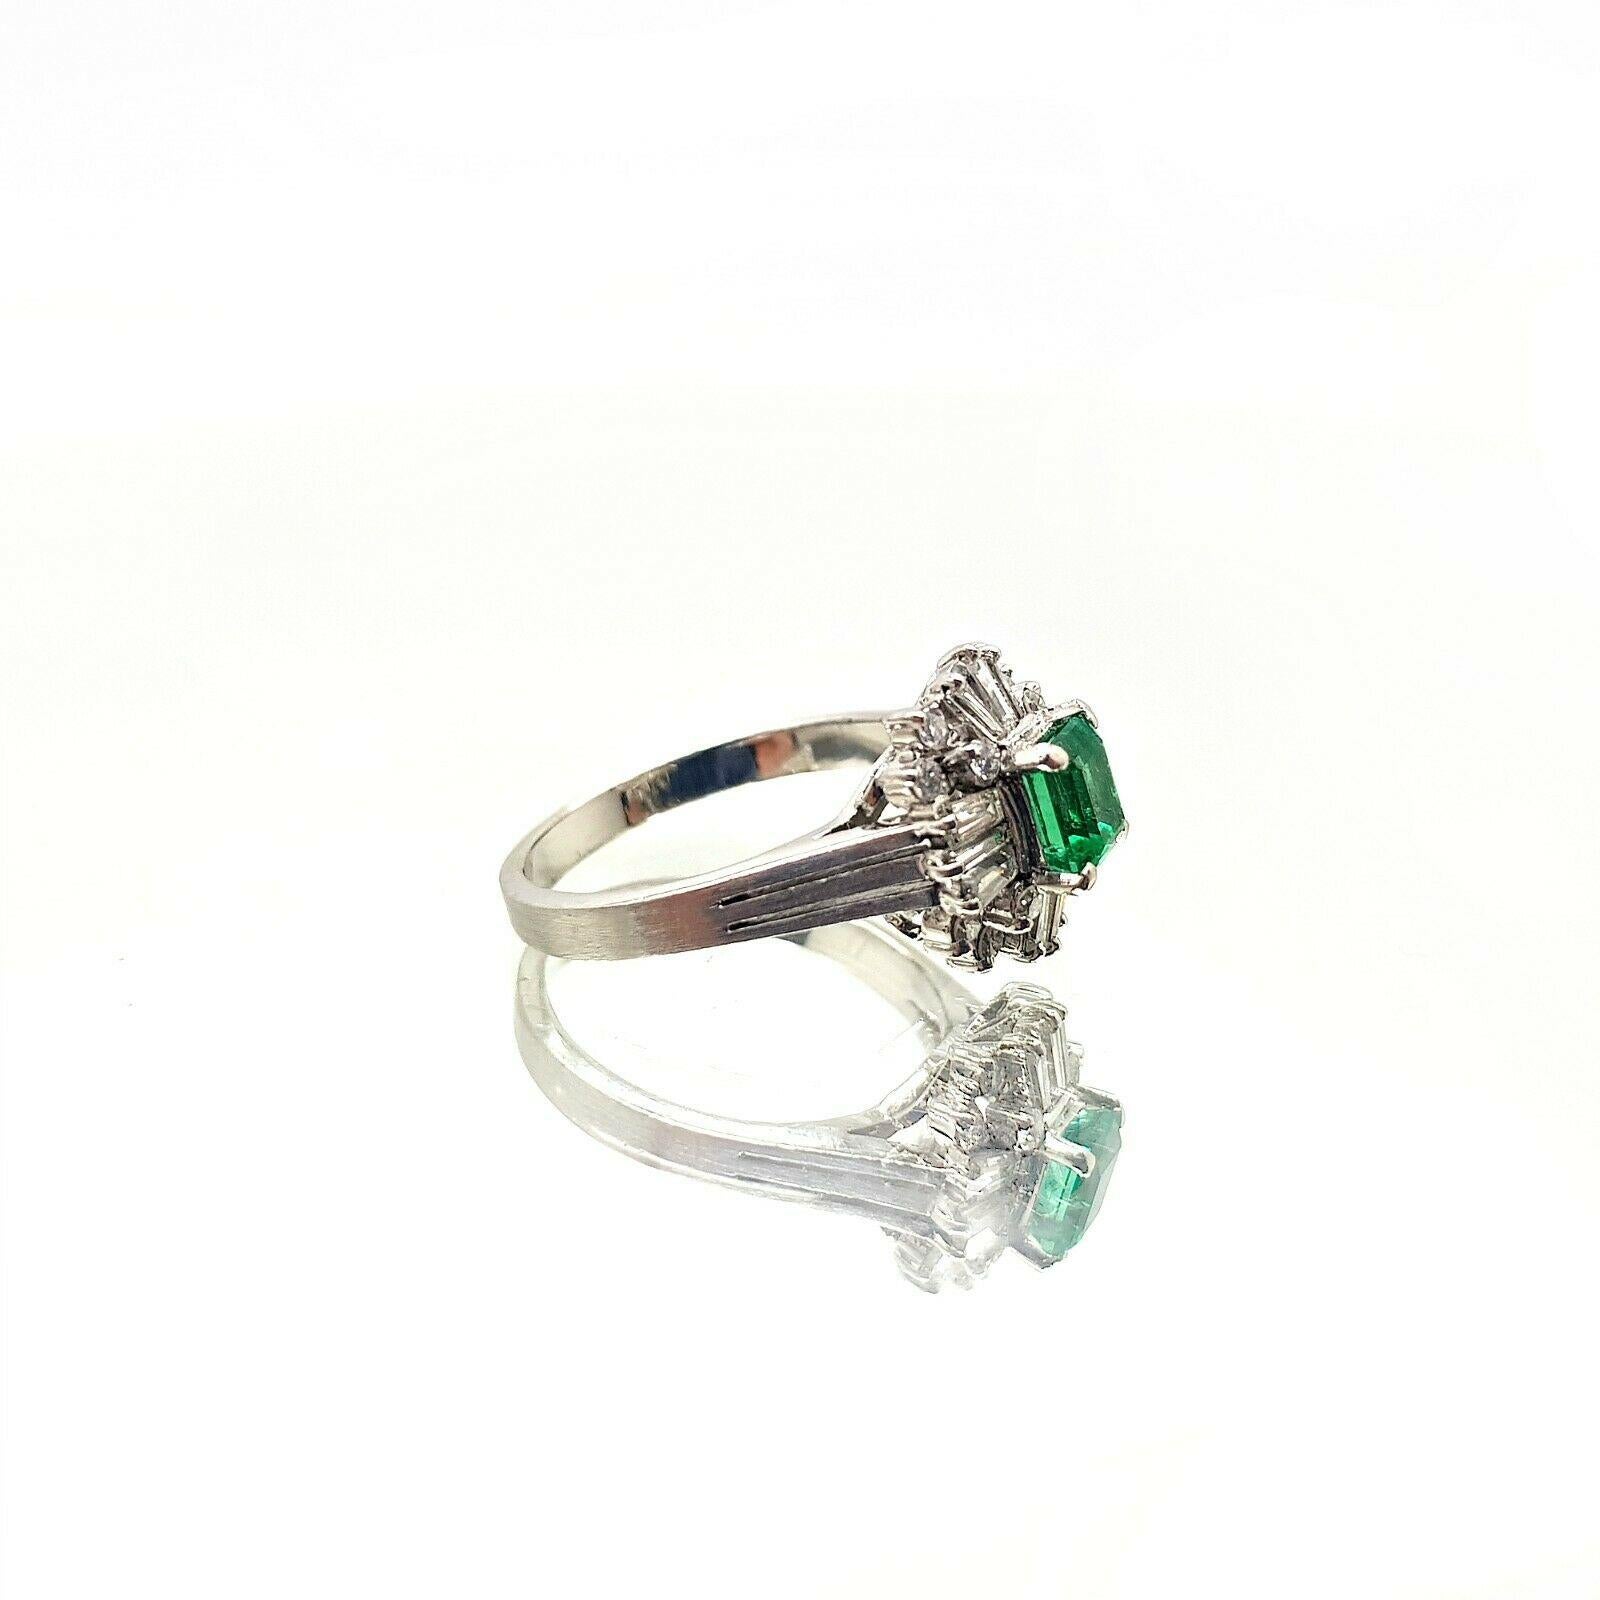  Specifications:
    main stone: EMERALD  0.46ct
    additional: BAGUETTE AND ROUND DIAMONDS
    diamonds: RD apr. 0.18ct/12pcs, BG APR.0.75CT/12PCS
    carat total weight: 0.93
    color: H
    clarity:SI
    brand: custom
    metal: PLATINUM
   